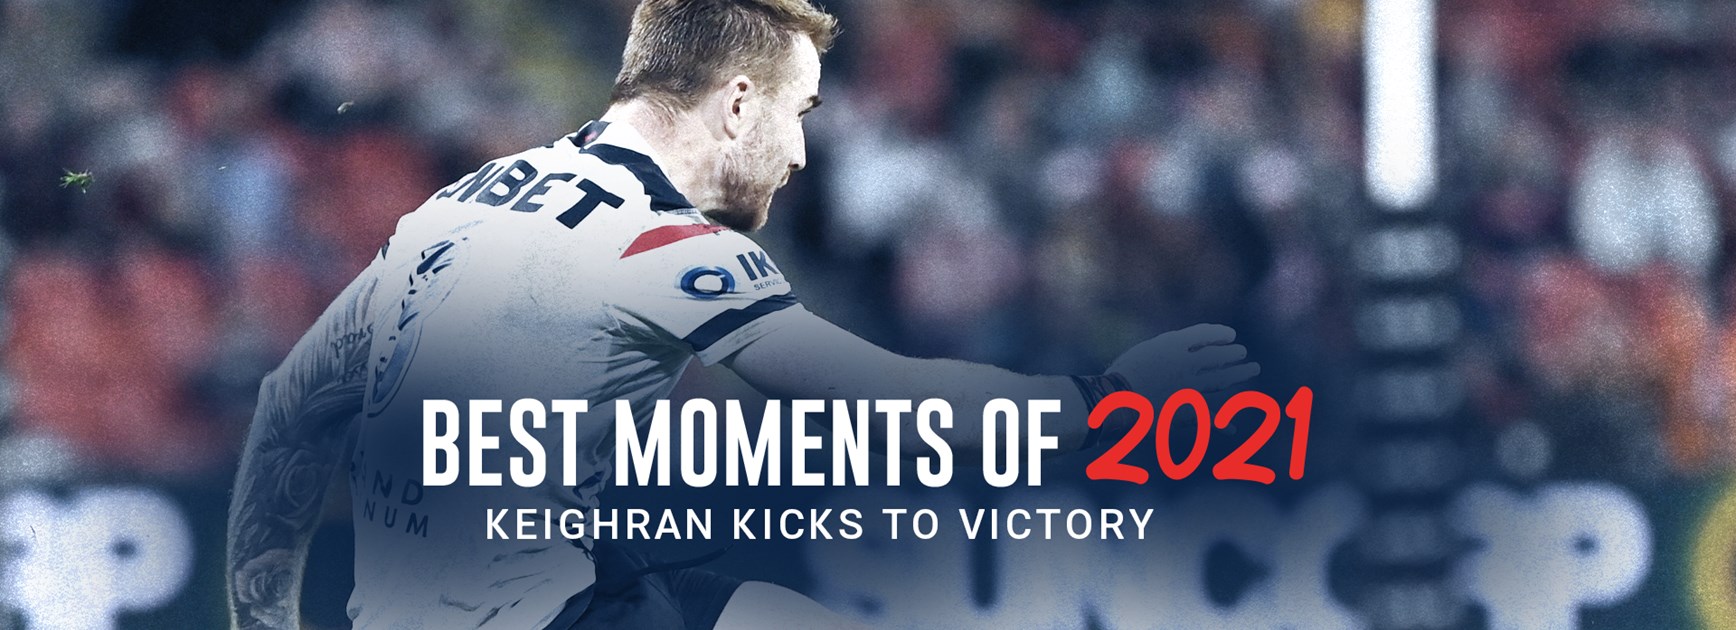 Best Moments of 2021: Keighran Kicks to Victory